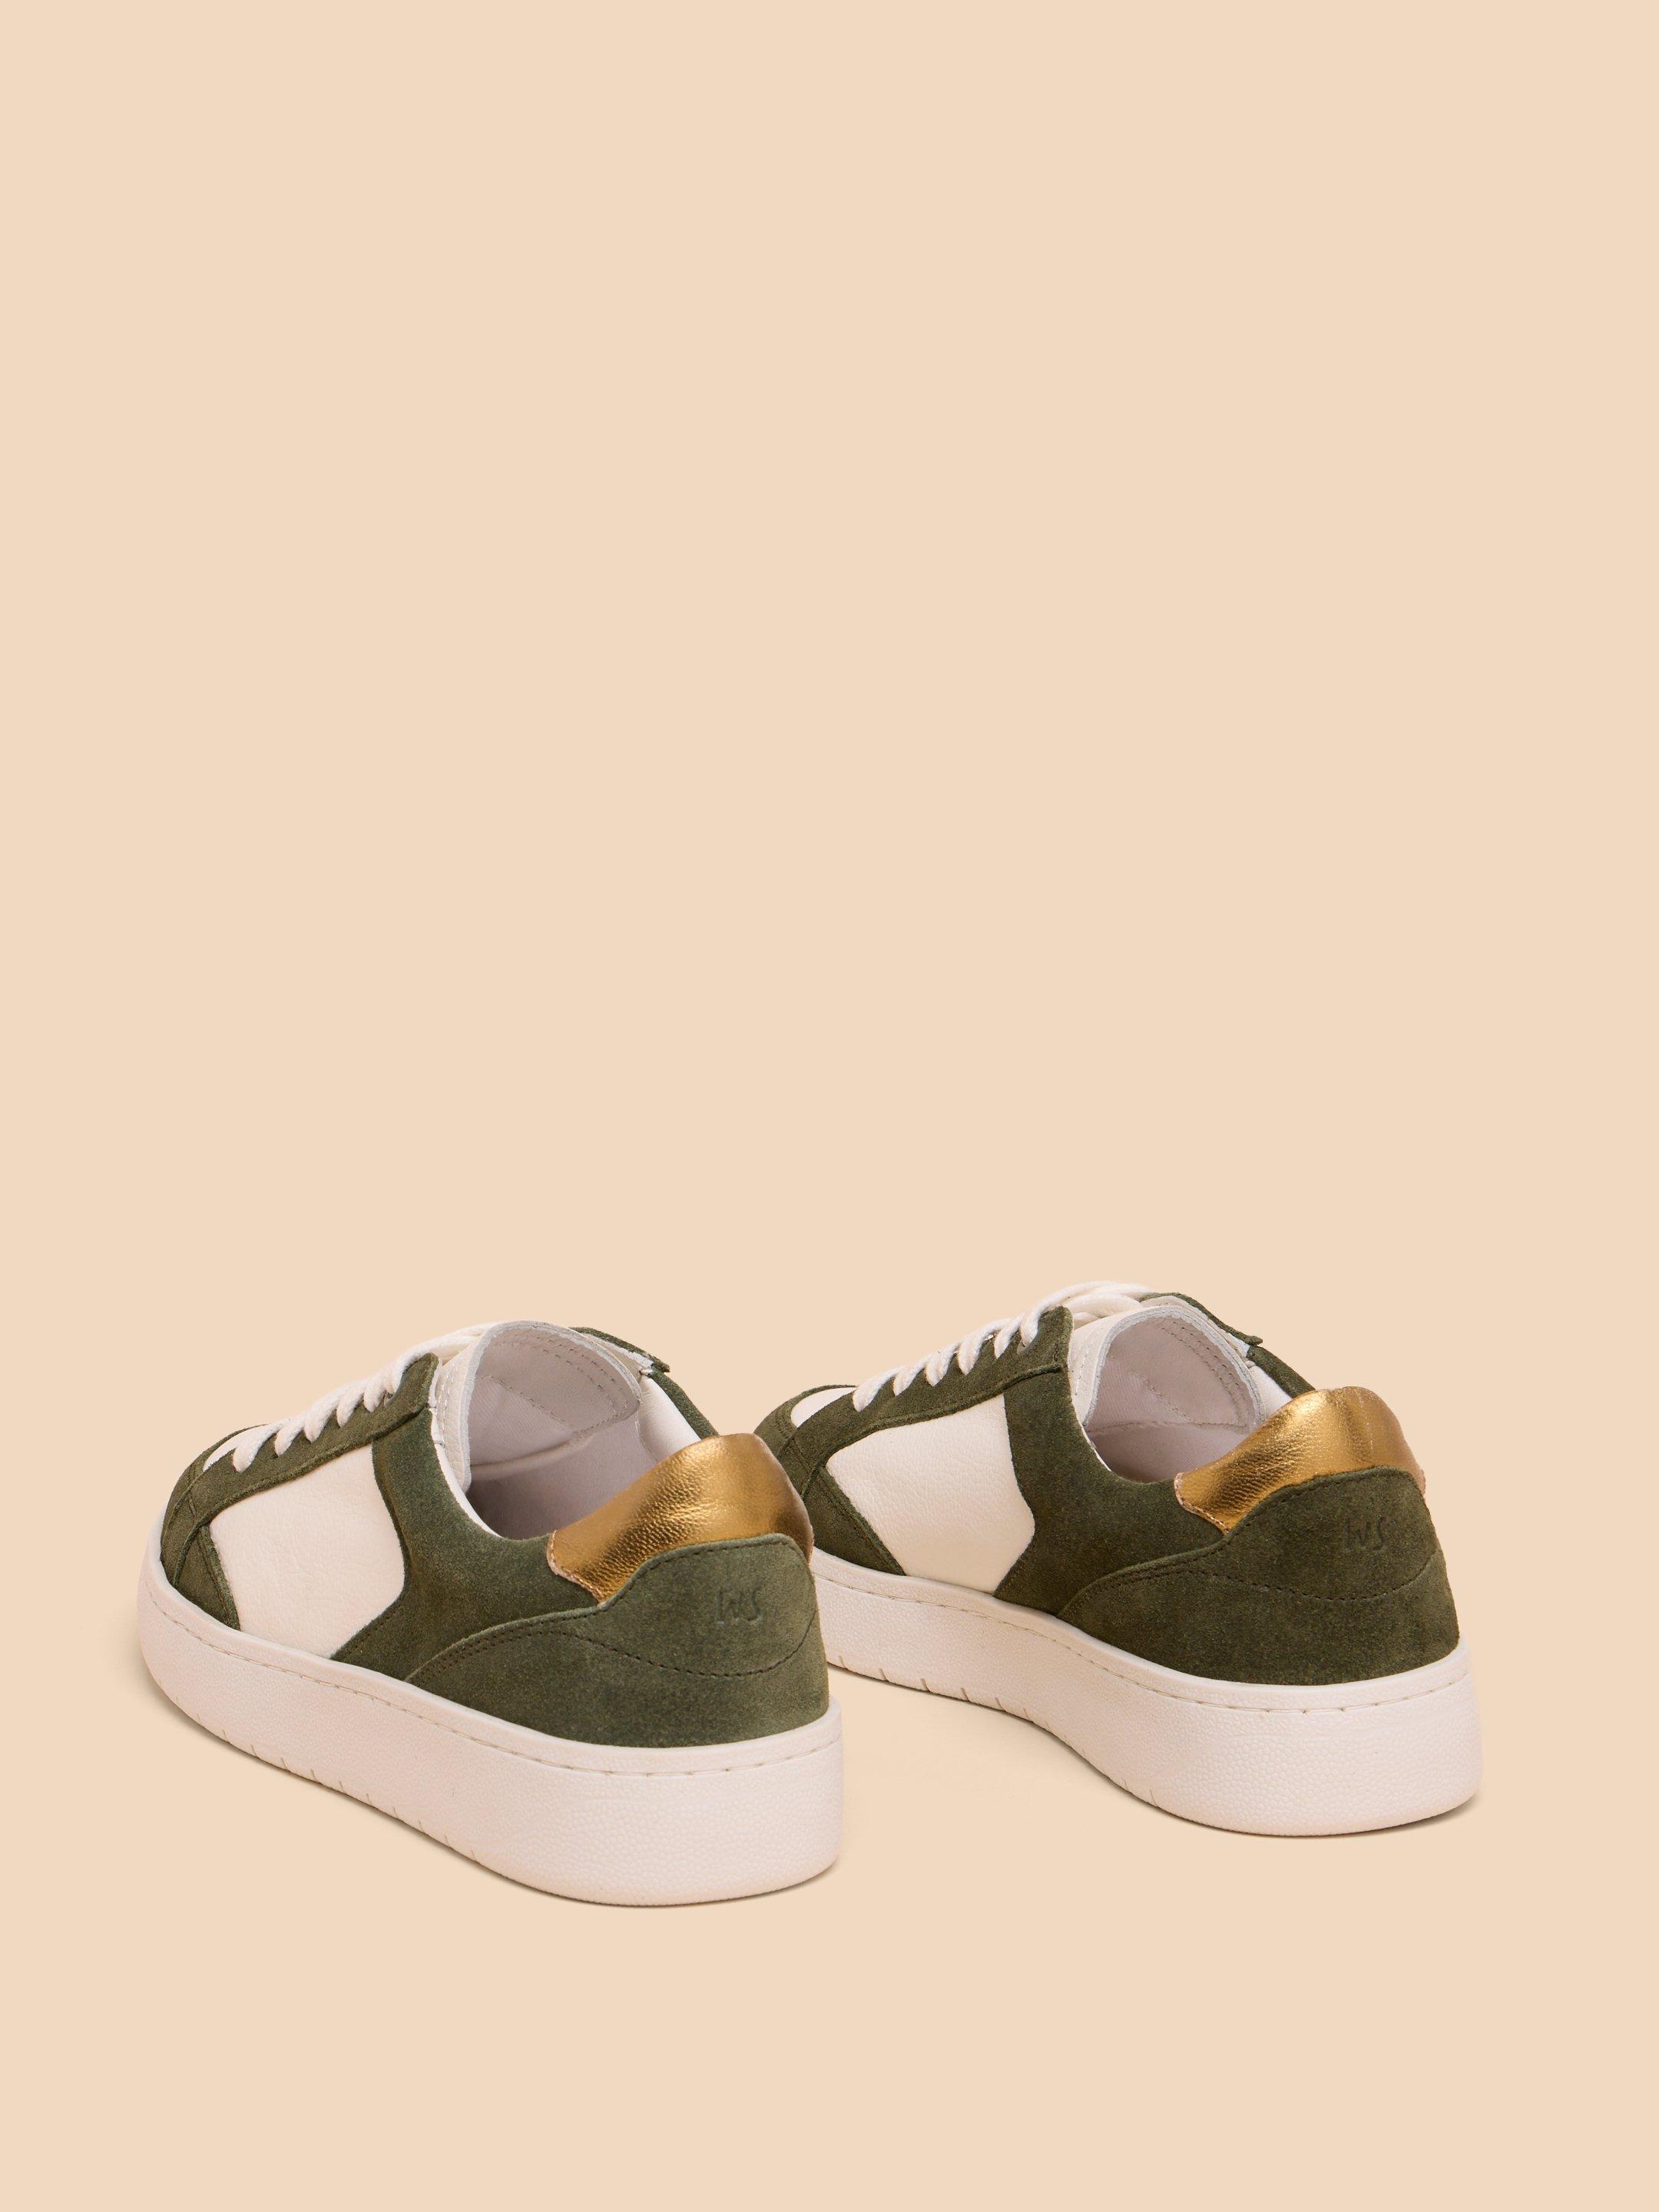 Dahlia Leather Trainer in GREEN MLT - FLAT BACK